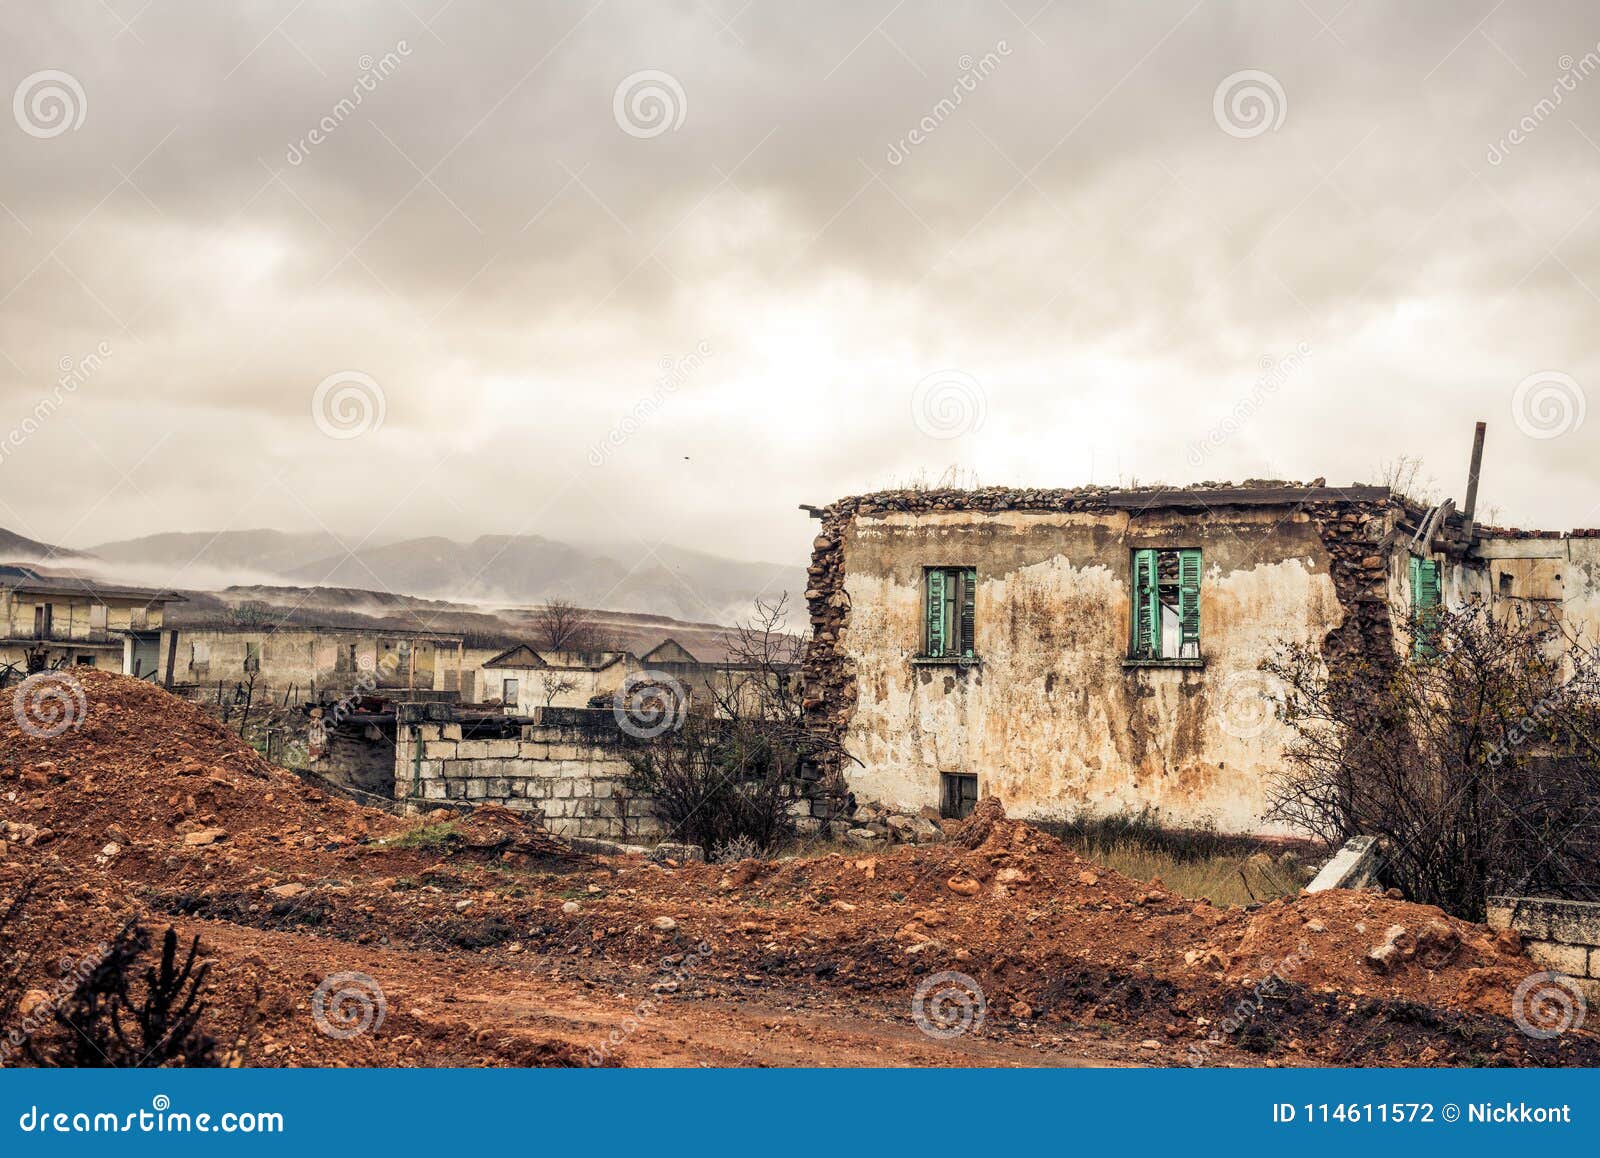 An Abandoned Town in Ptolemaida Greece Stock Photo - Image of village ...